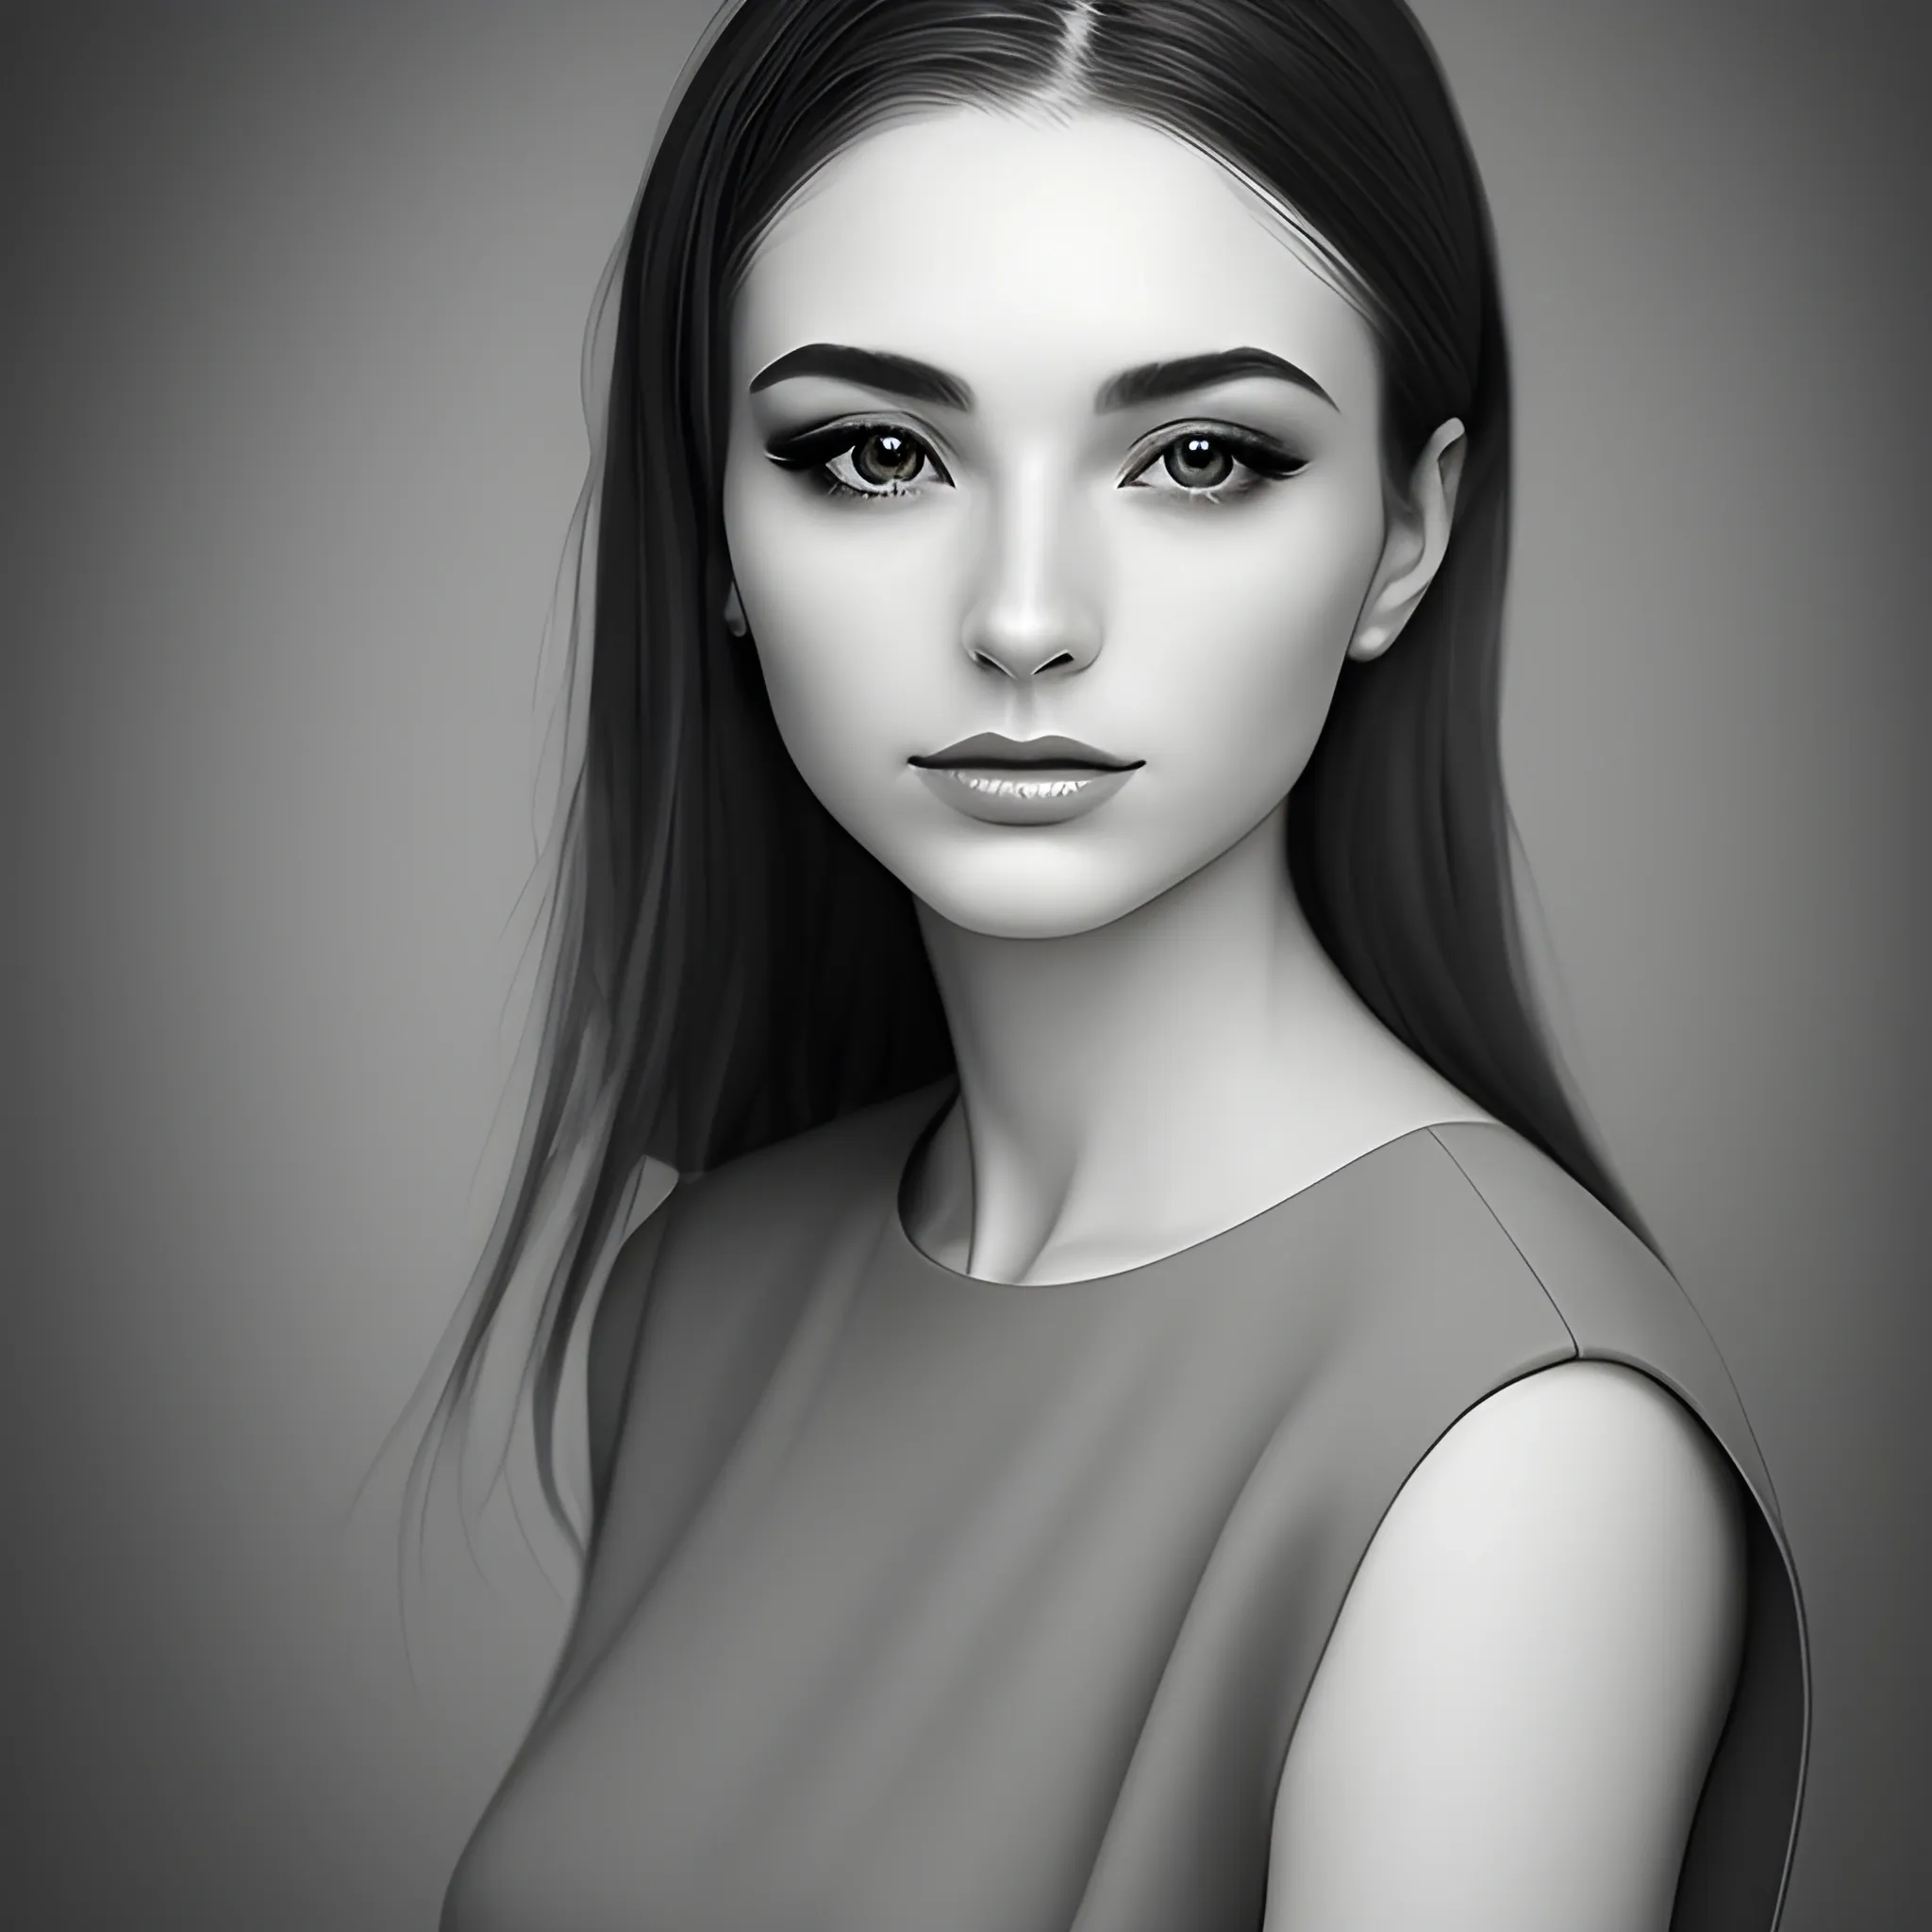 Portrait of beautiful woman, gray tones, solemn and elegant, professional photography